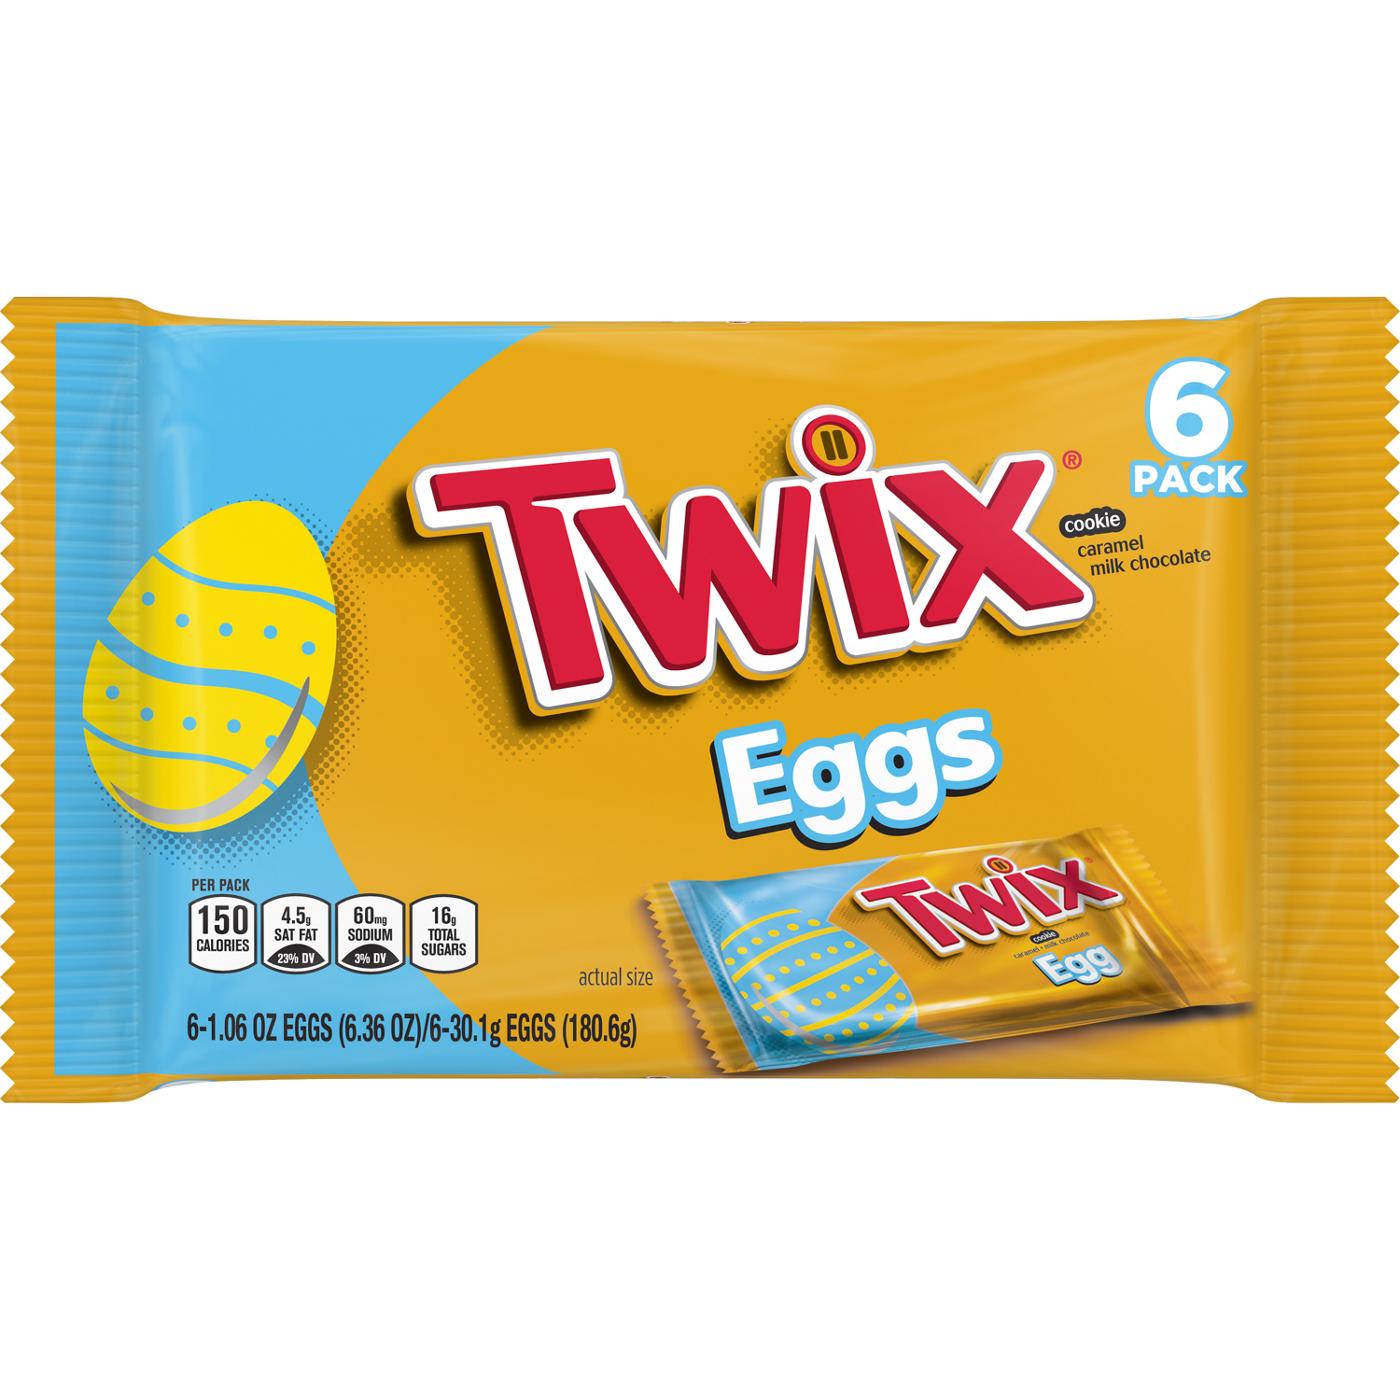 Twix Eggs Easter Candy; image 1 of 8